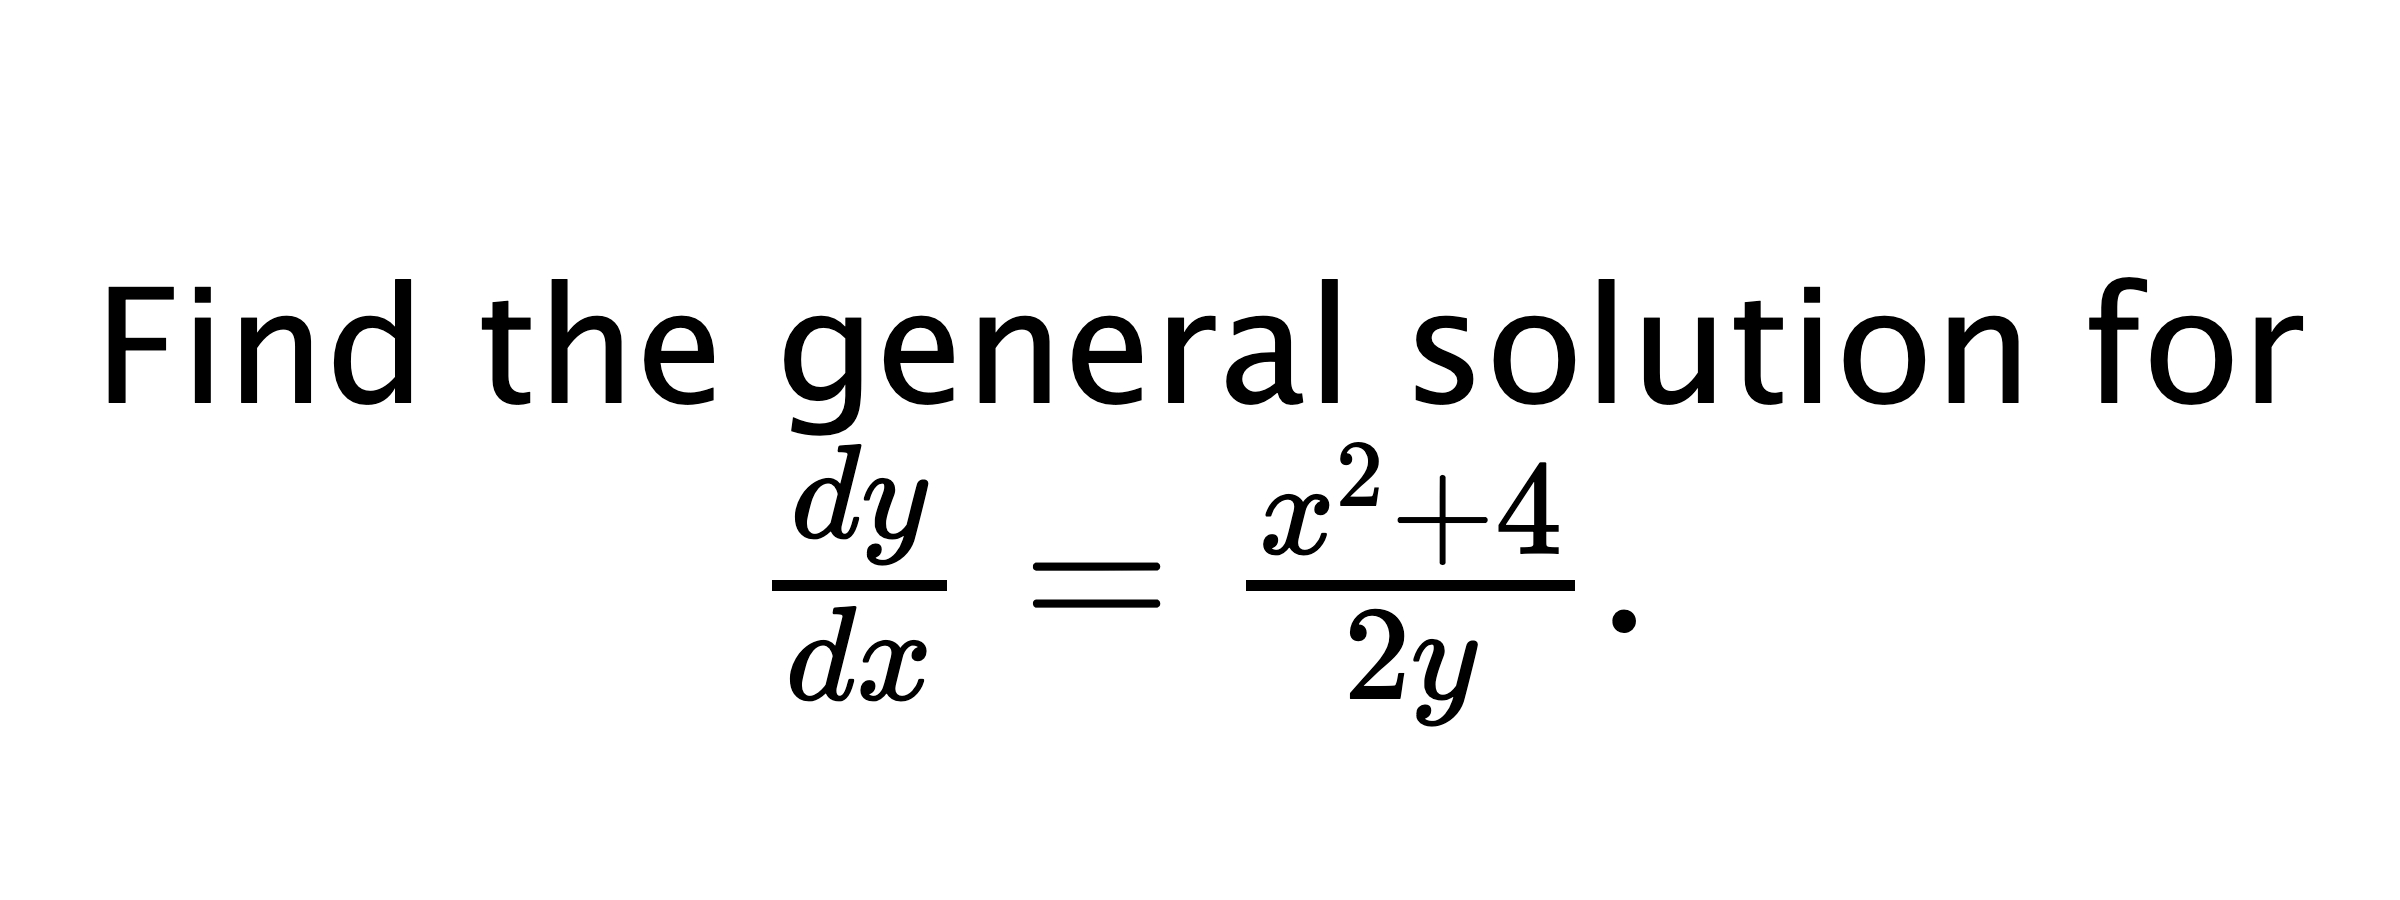  Find the general solution for $ \frac{dy}{dx}=\frac{x^{2}+4}{2y}. $